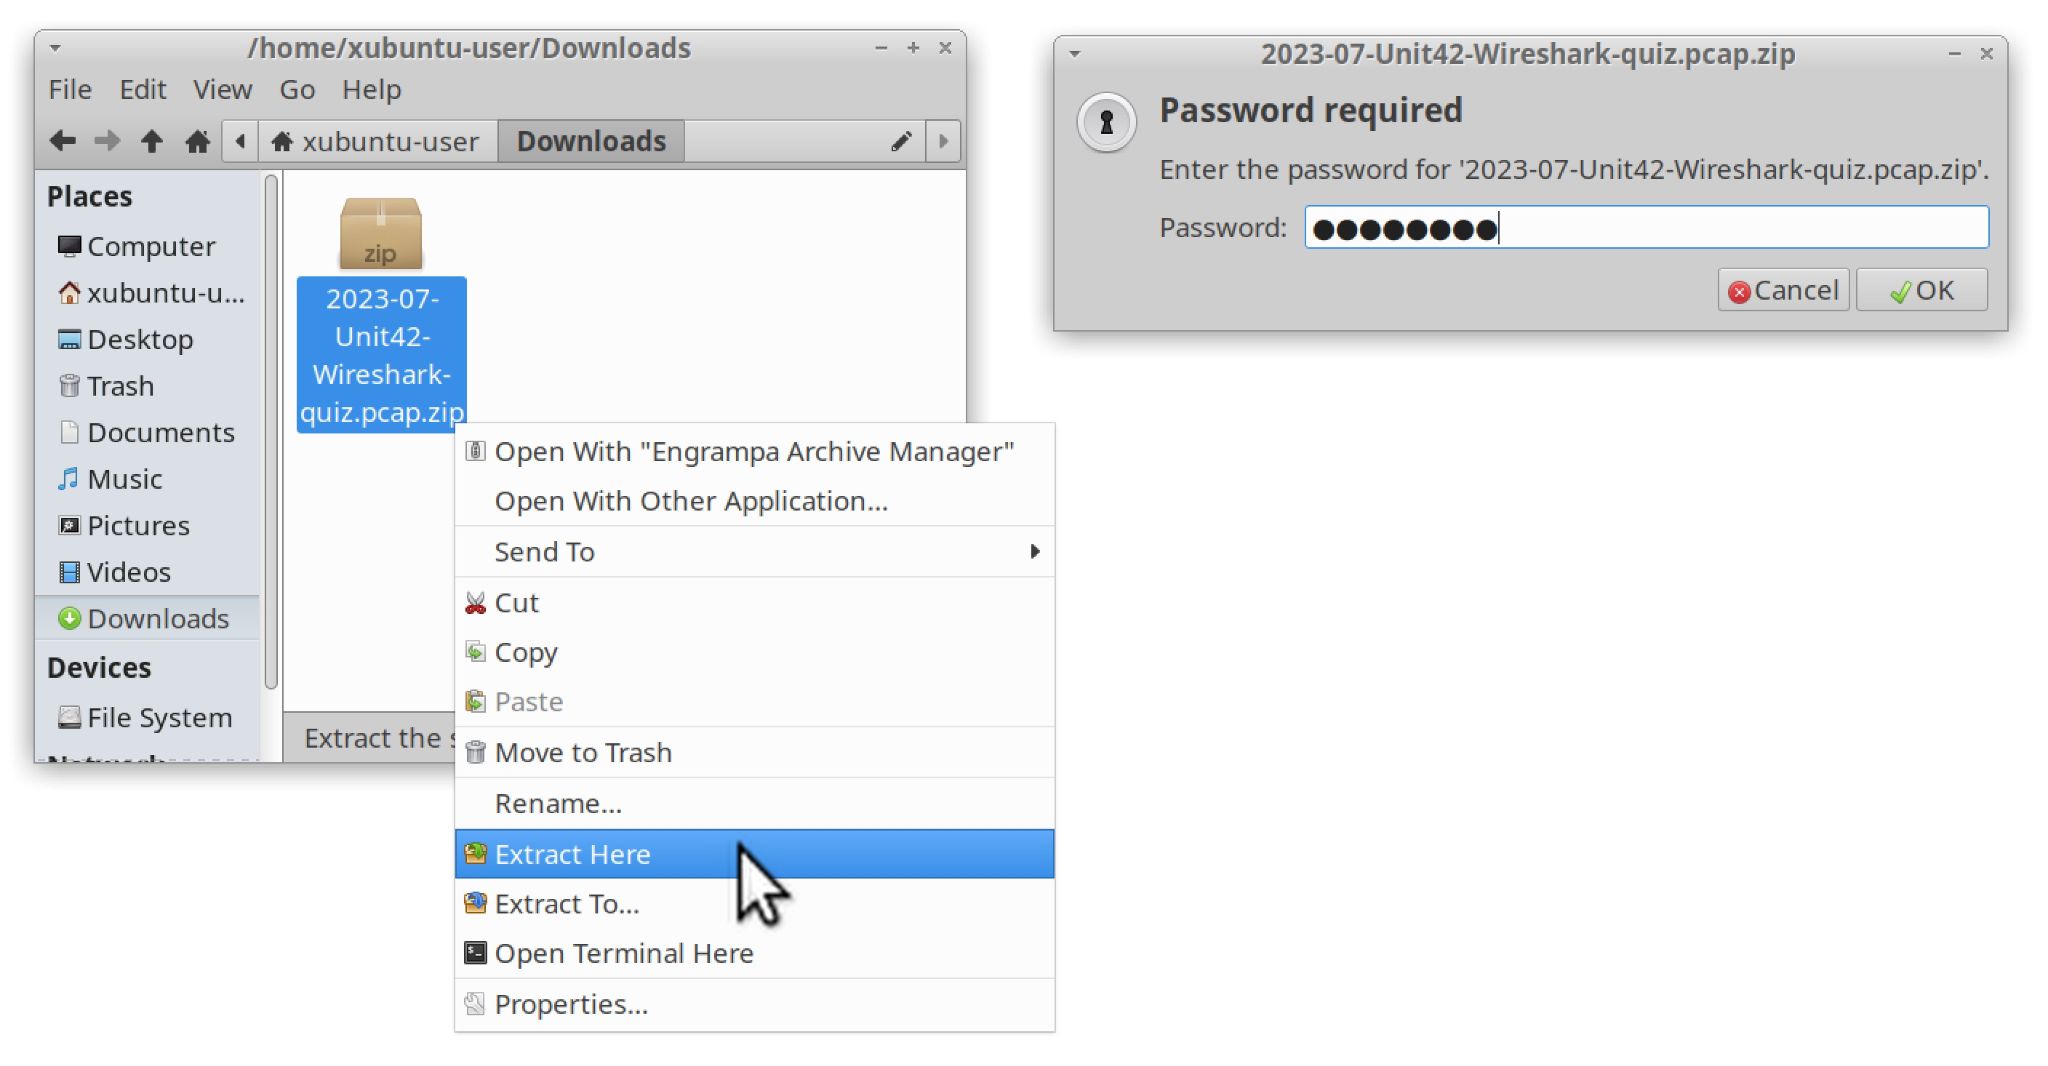 Image 3 is a screenshot of how to extract the zip file contents from the zip. From the downloads window, the user can select “Extract Here” and enter the password into the “Password required” window. 